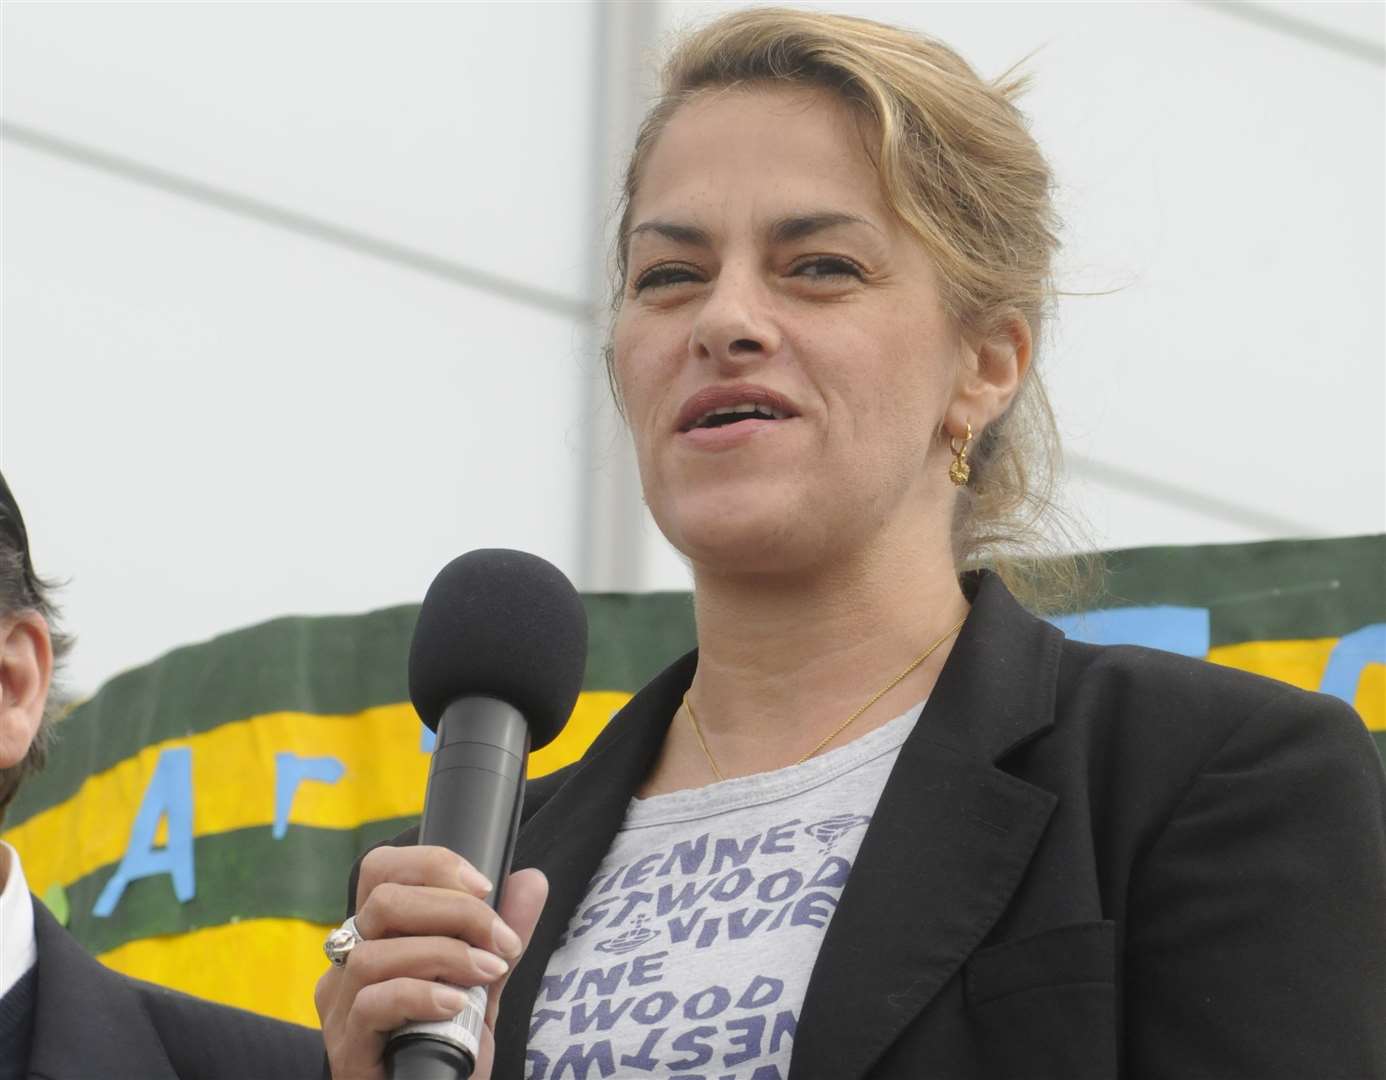 Tracey Emin at the opening of the Turner in 2011